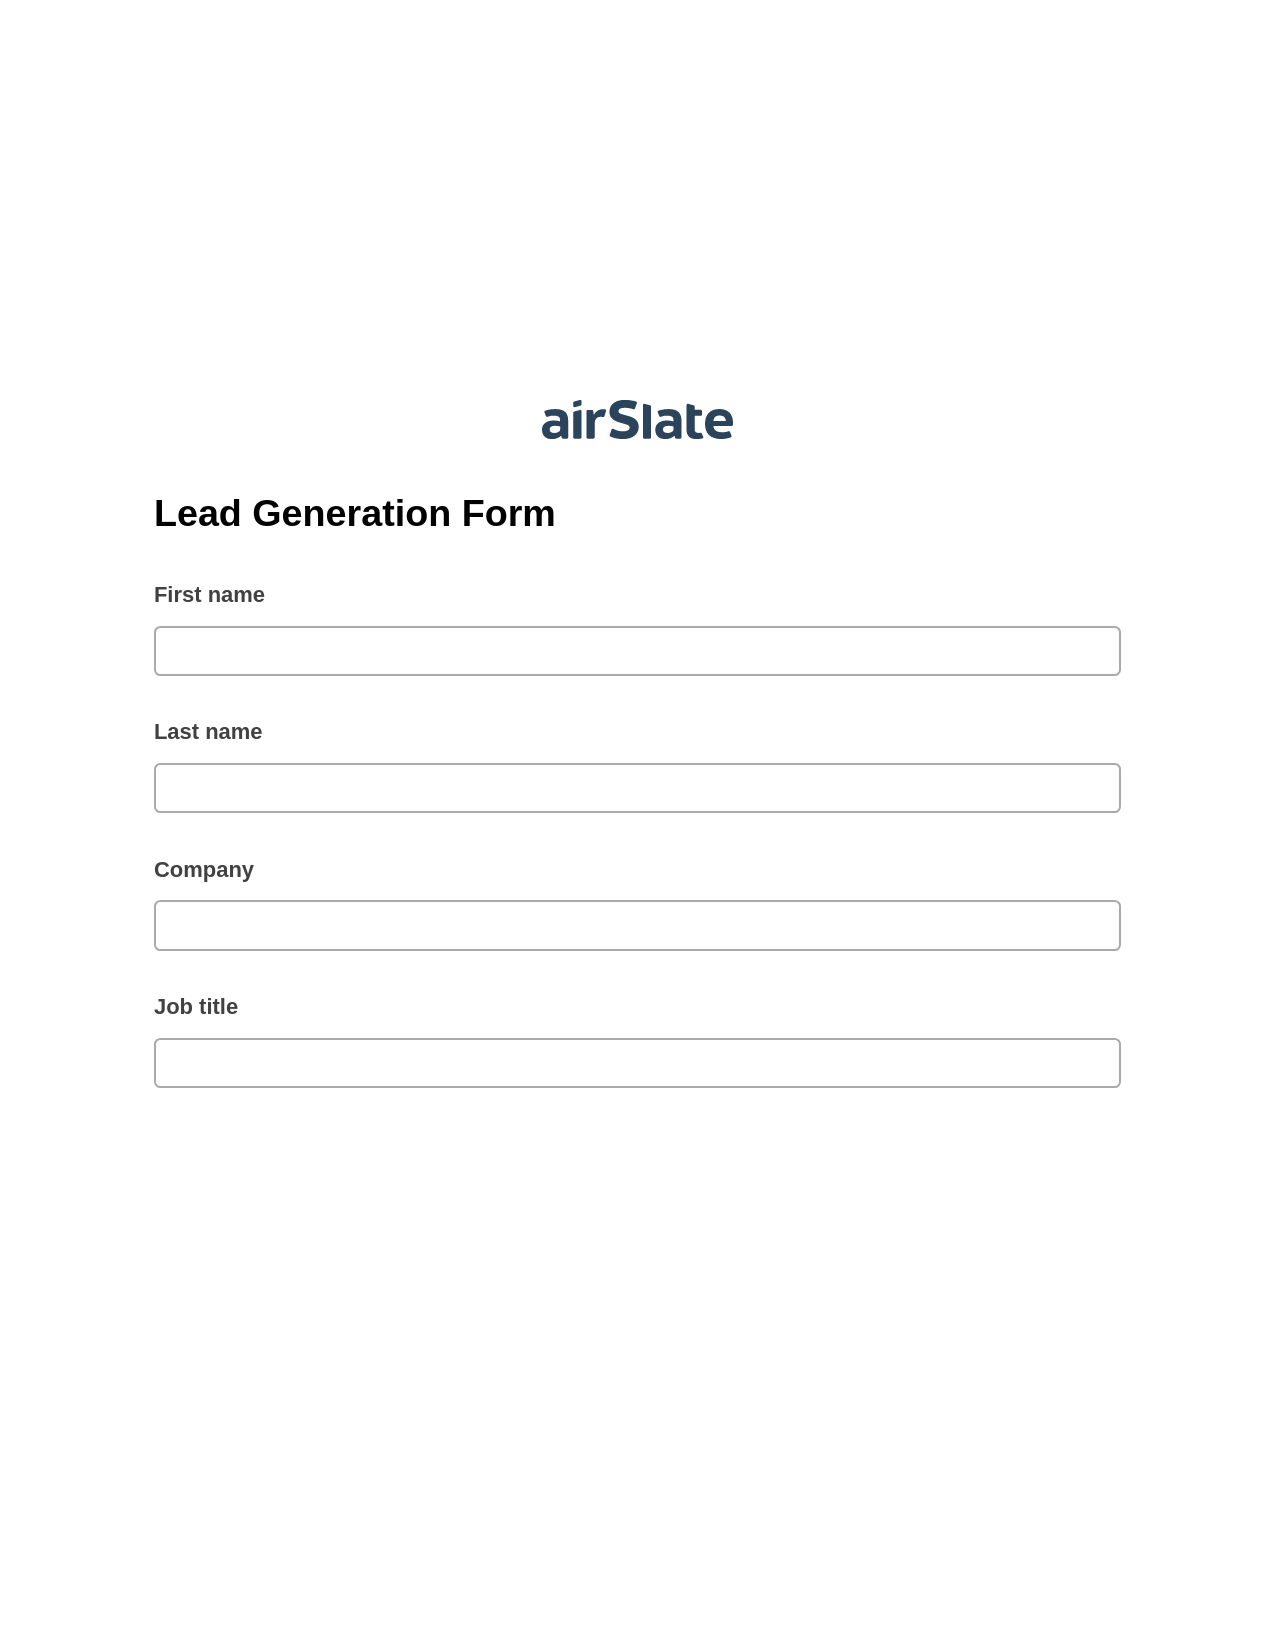 Lead Generation Form Pre-fill from Google Sheets Bot, Send a Slate with Roles Bot, Export to Google Sheet Bot